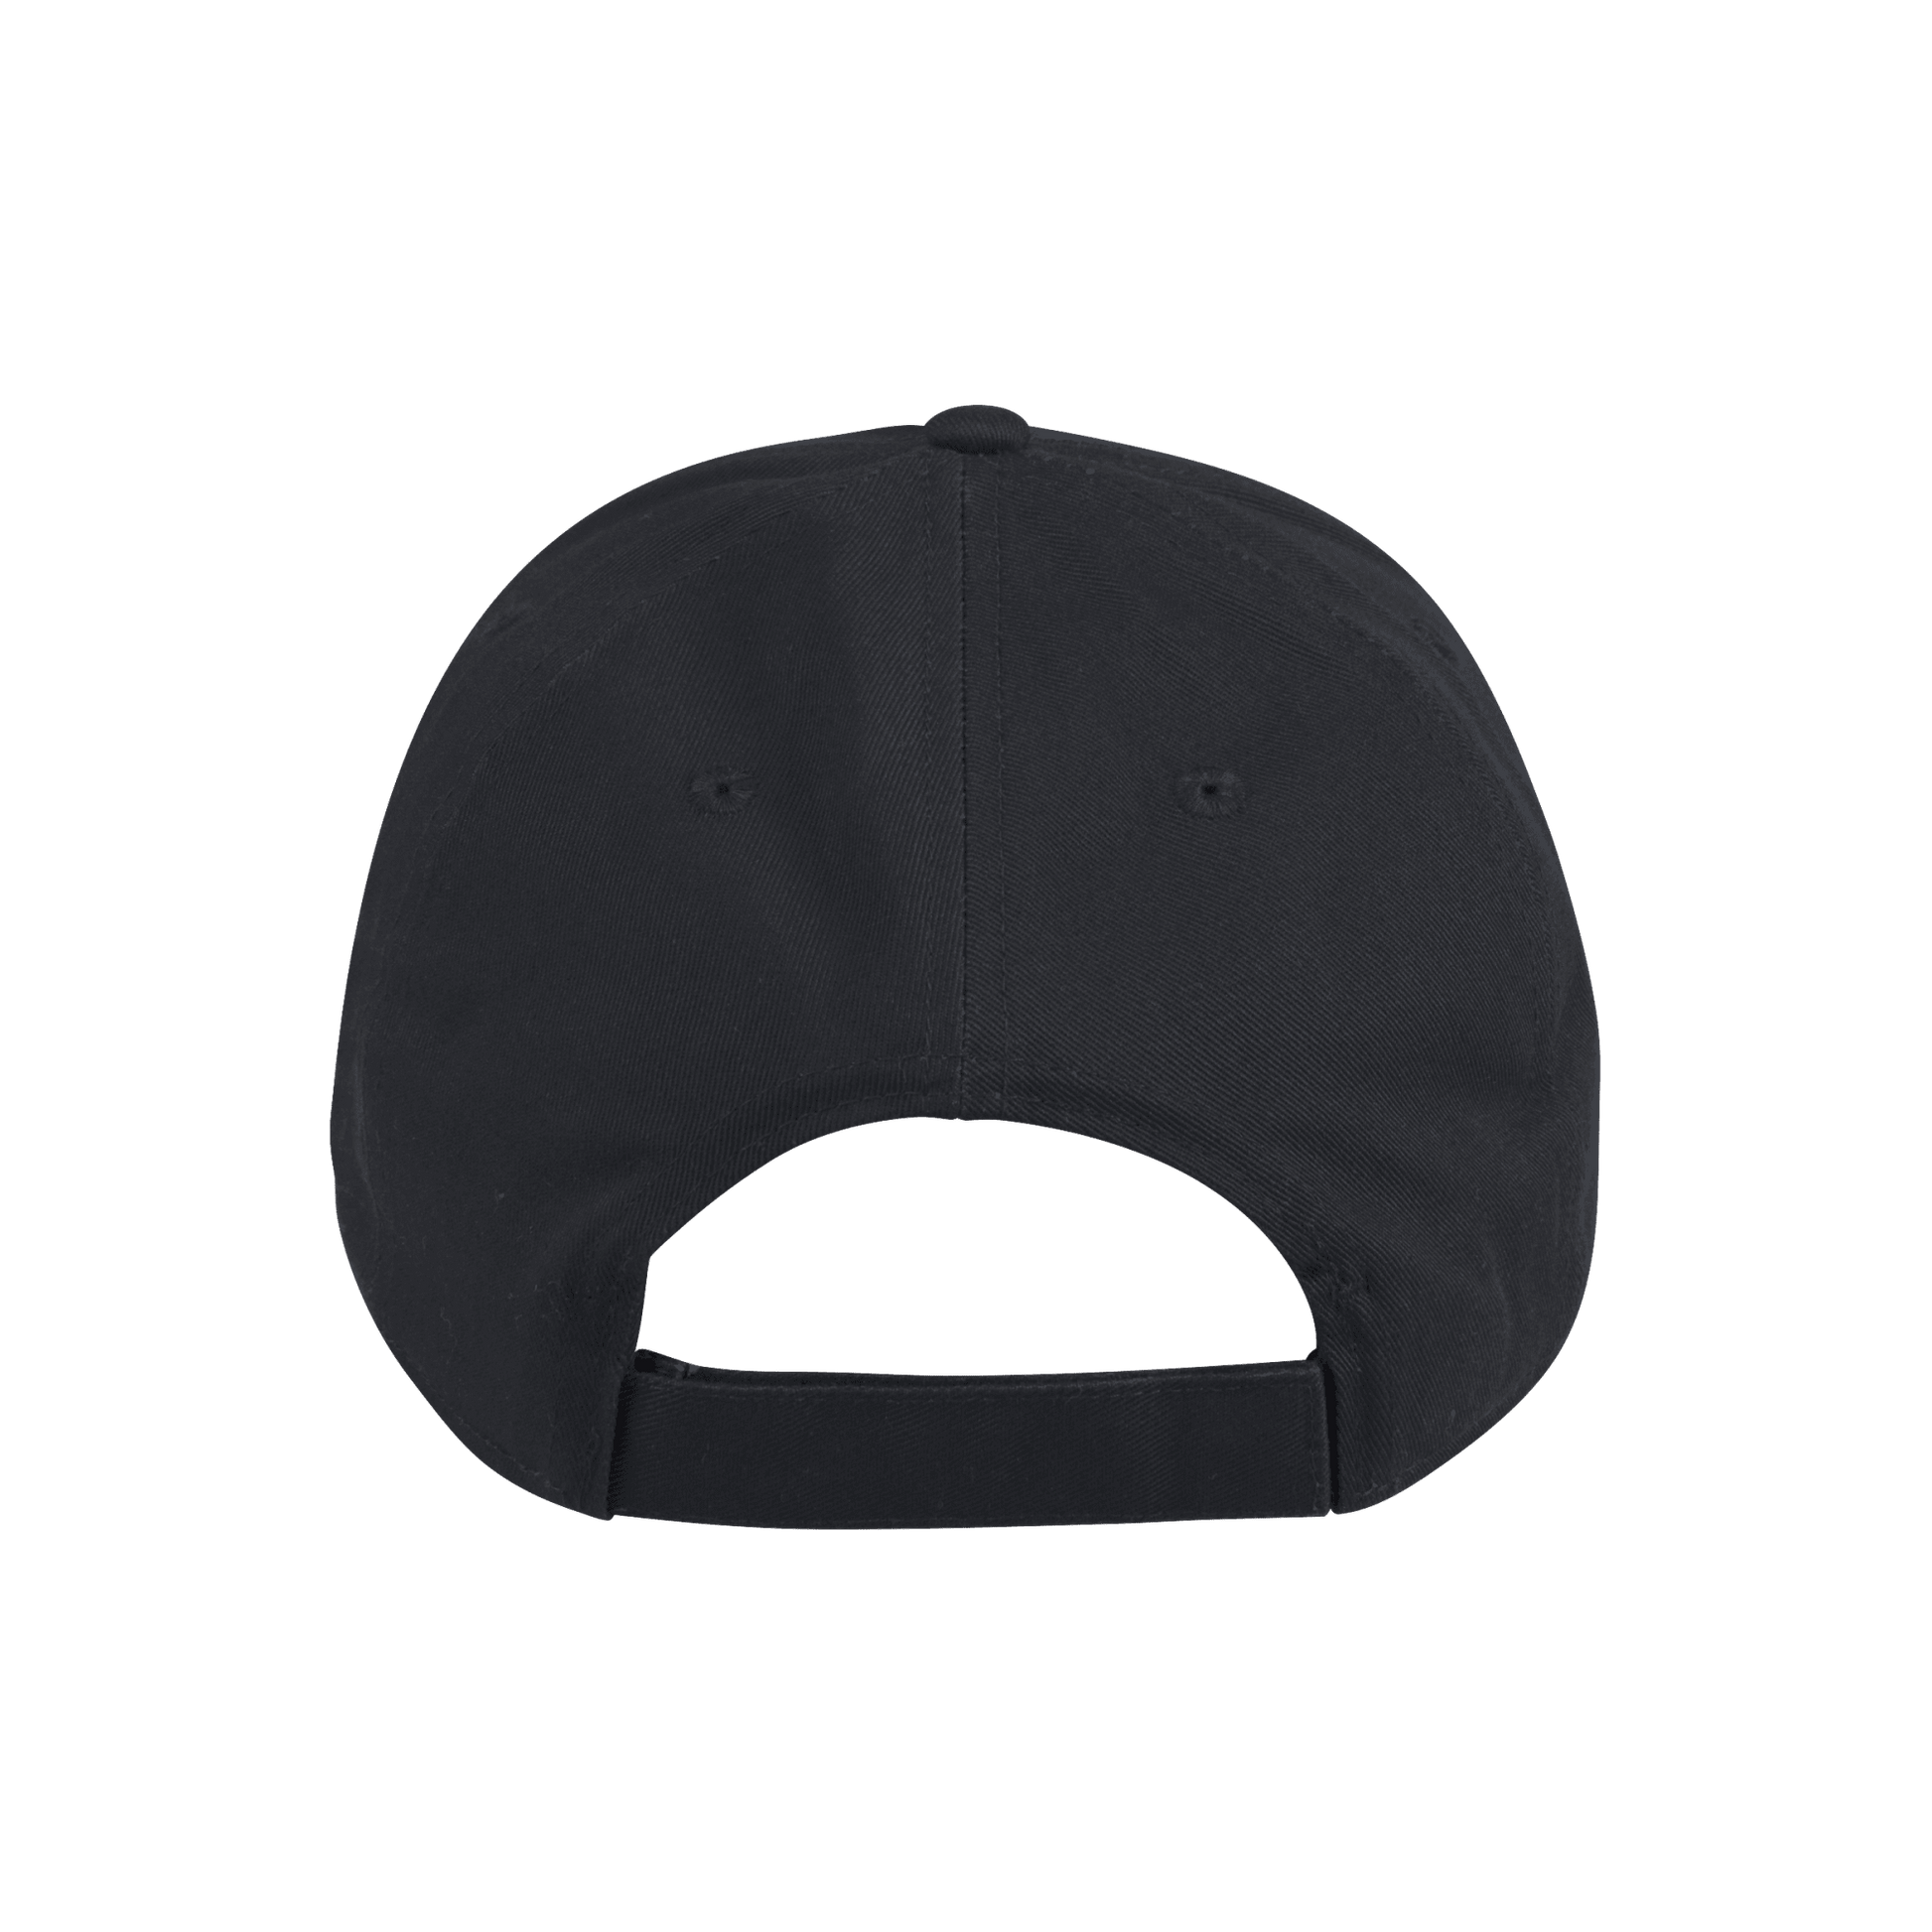 Cap – Team Structured Adjustable Golf Products adidas